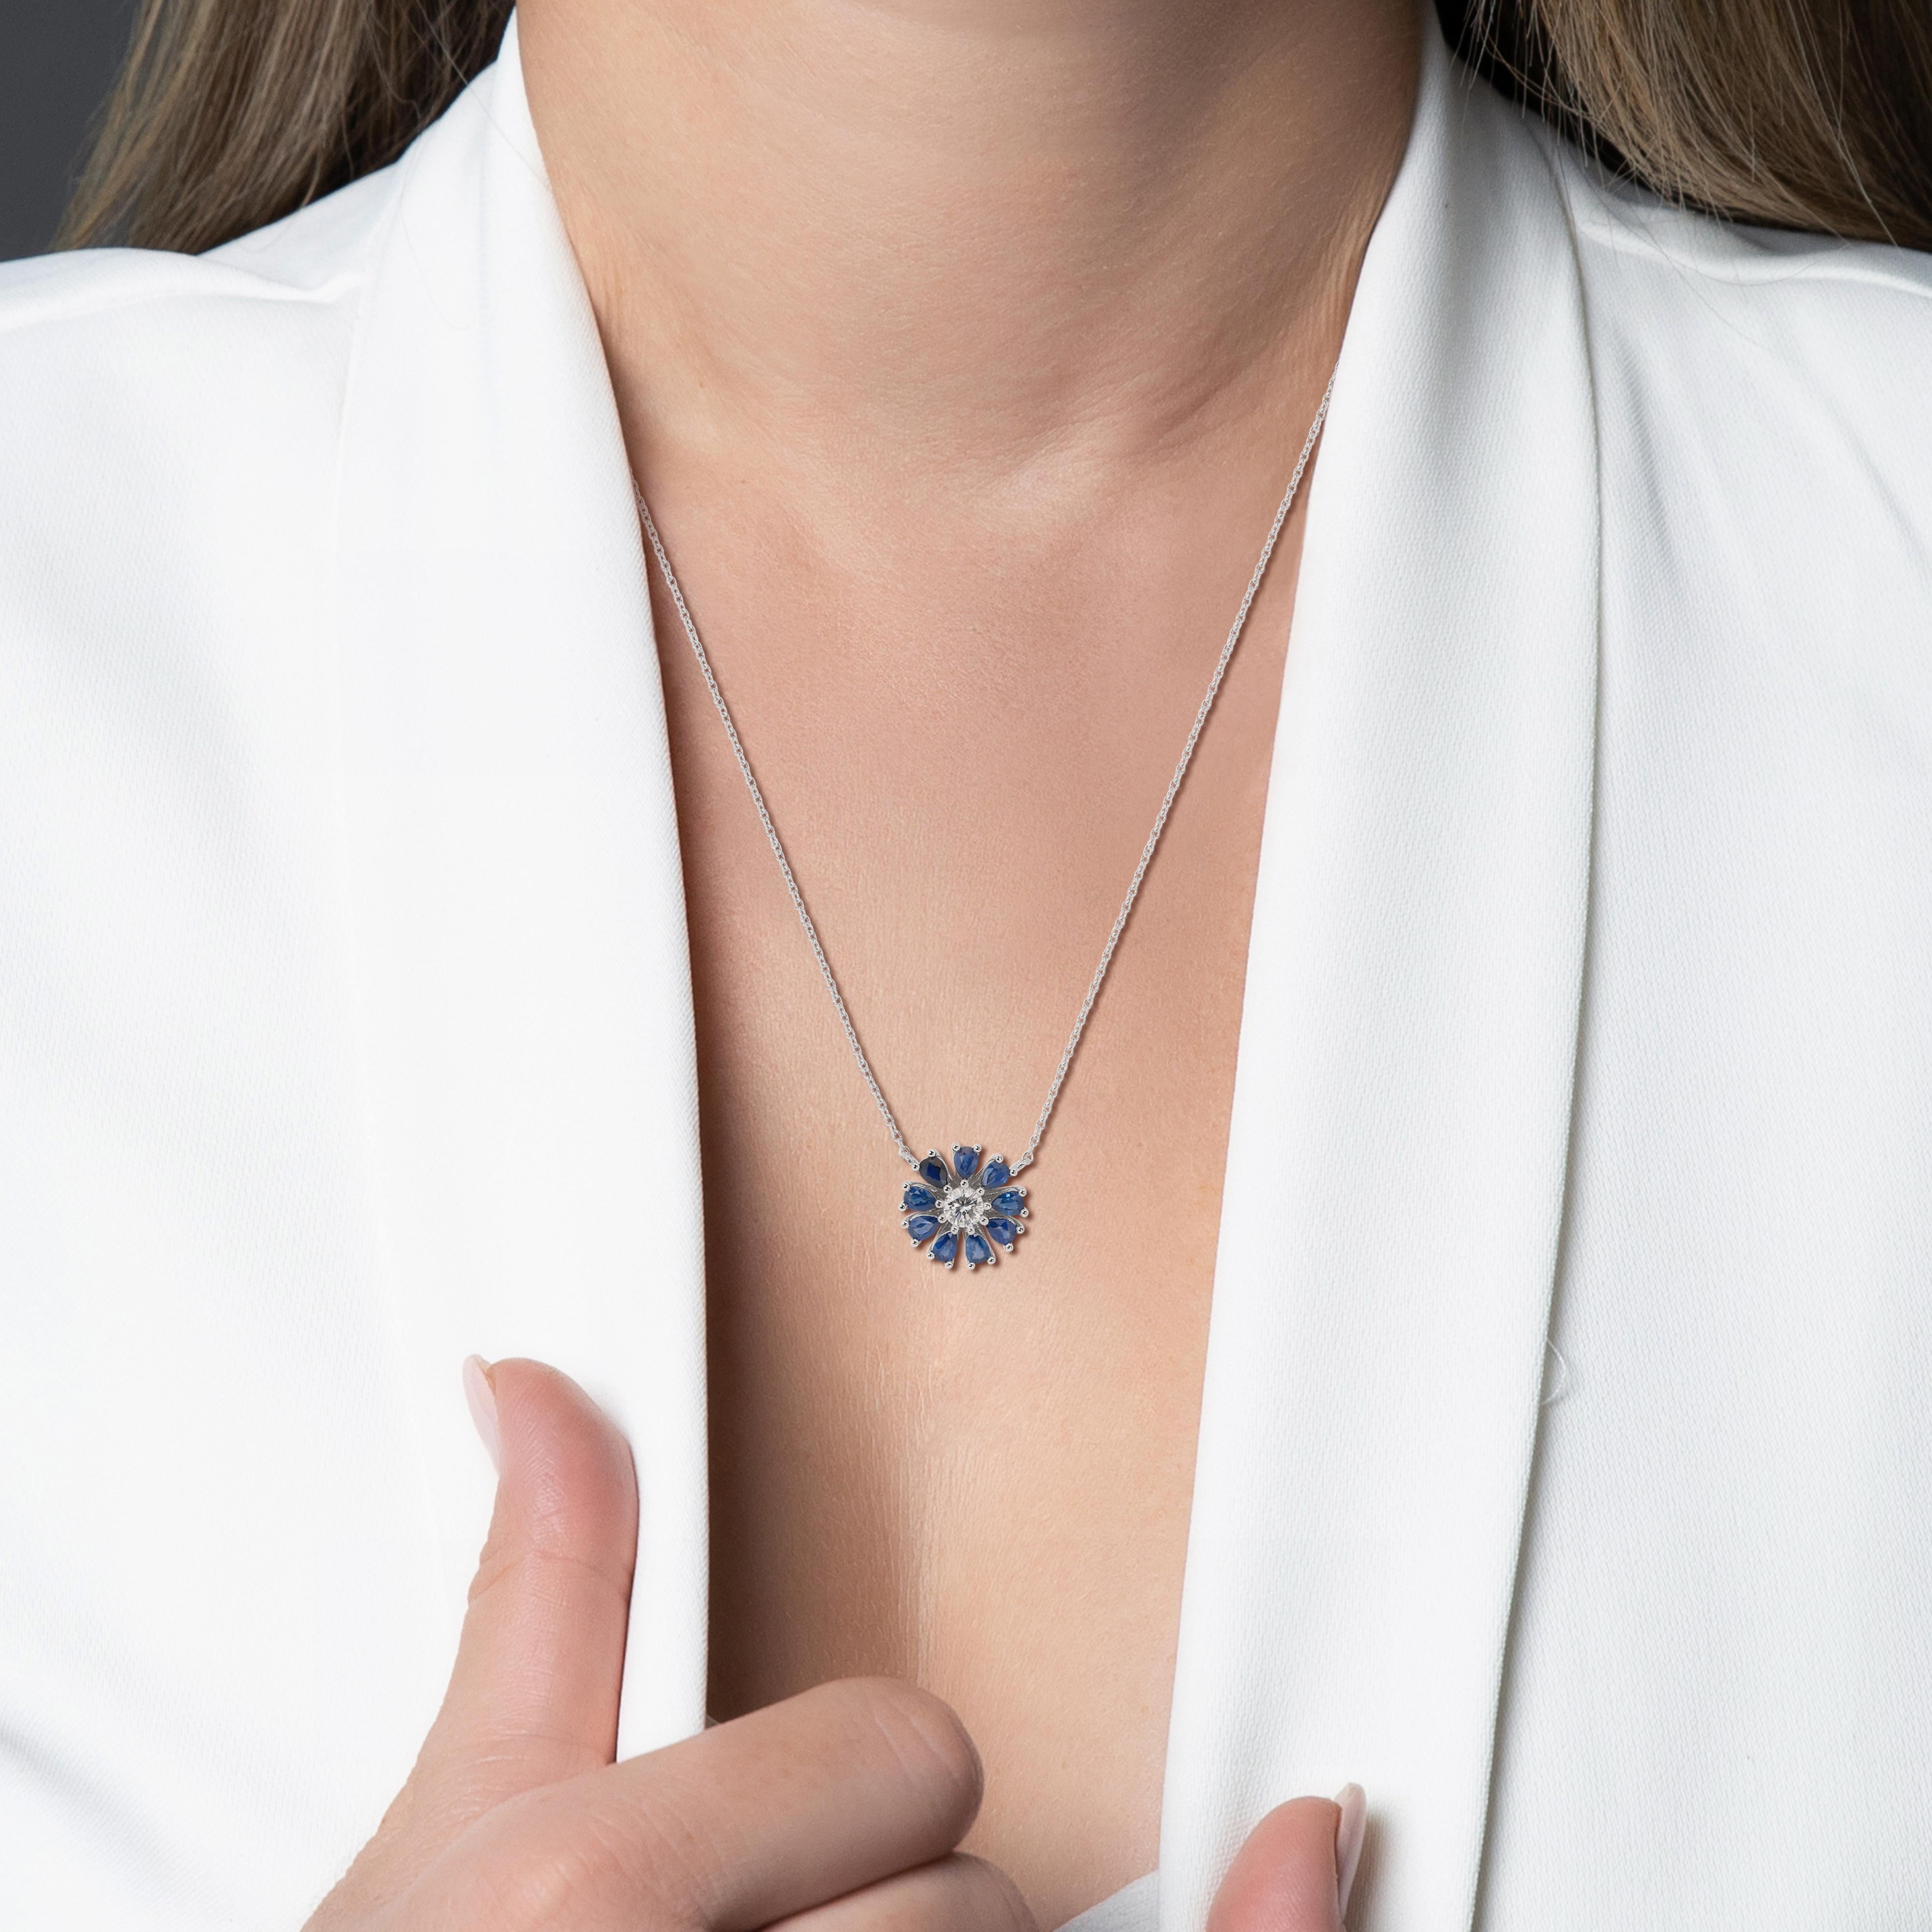 Enchanting 14k White Gold Natural Diamonds w/ Sapphires Necklace w/1.72 ct- IGI Certified

This dazzling necklace showcases a stunning combination of diamonds and sapphires, boasting IGI certification for guaranteed quality and authenticity. A